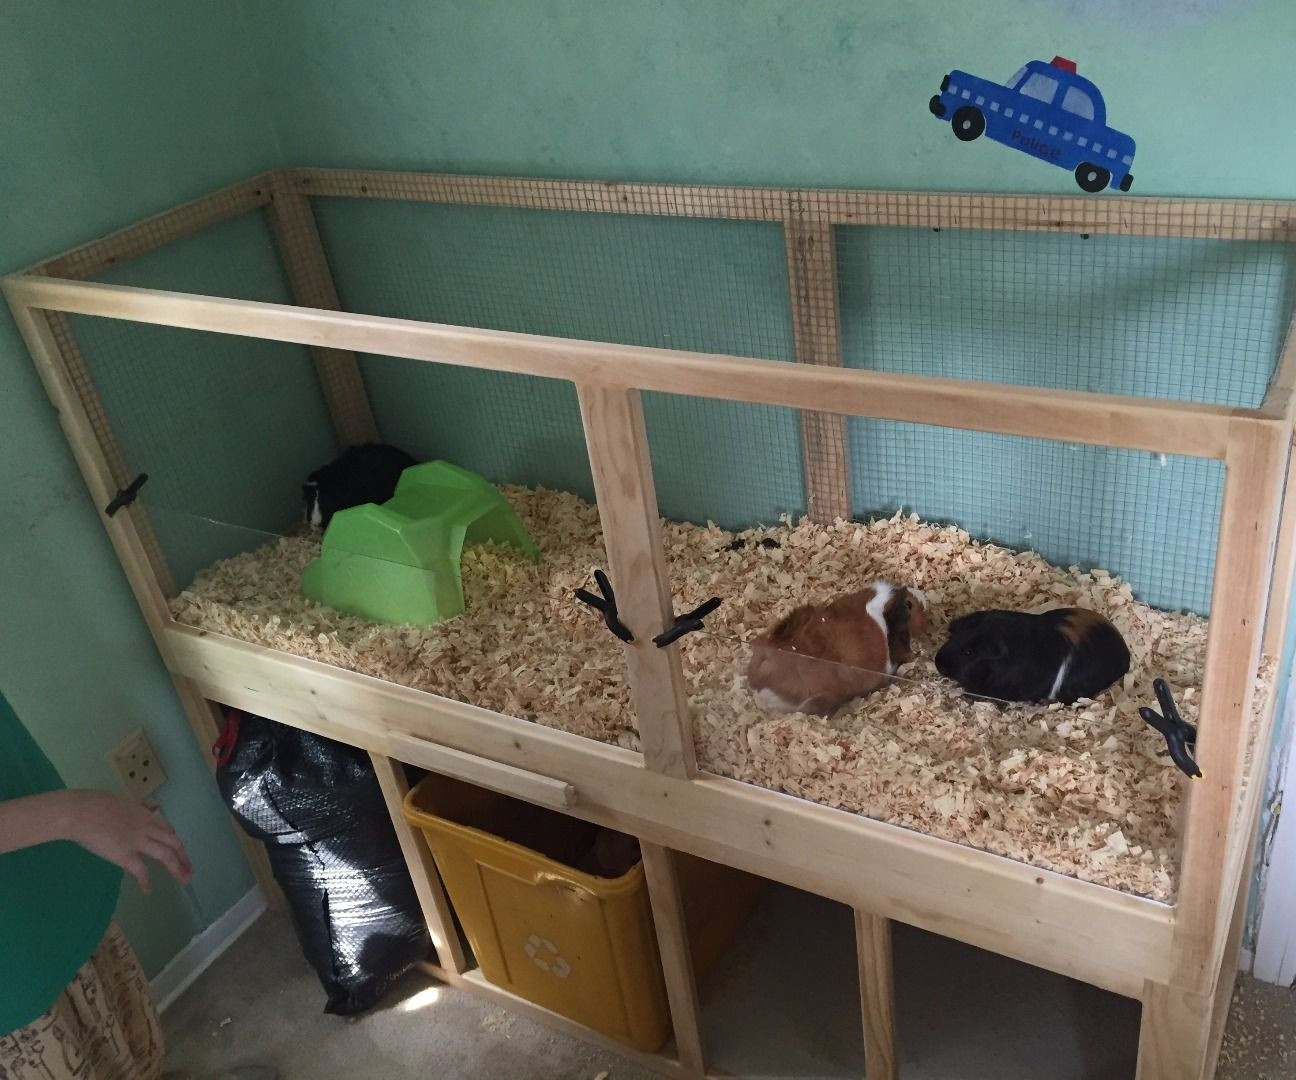 DIY Guinea Pig Cage Plans
 Build a Guinea Pig Cage With EASY Cleaning Projects With